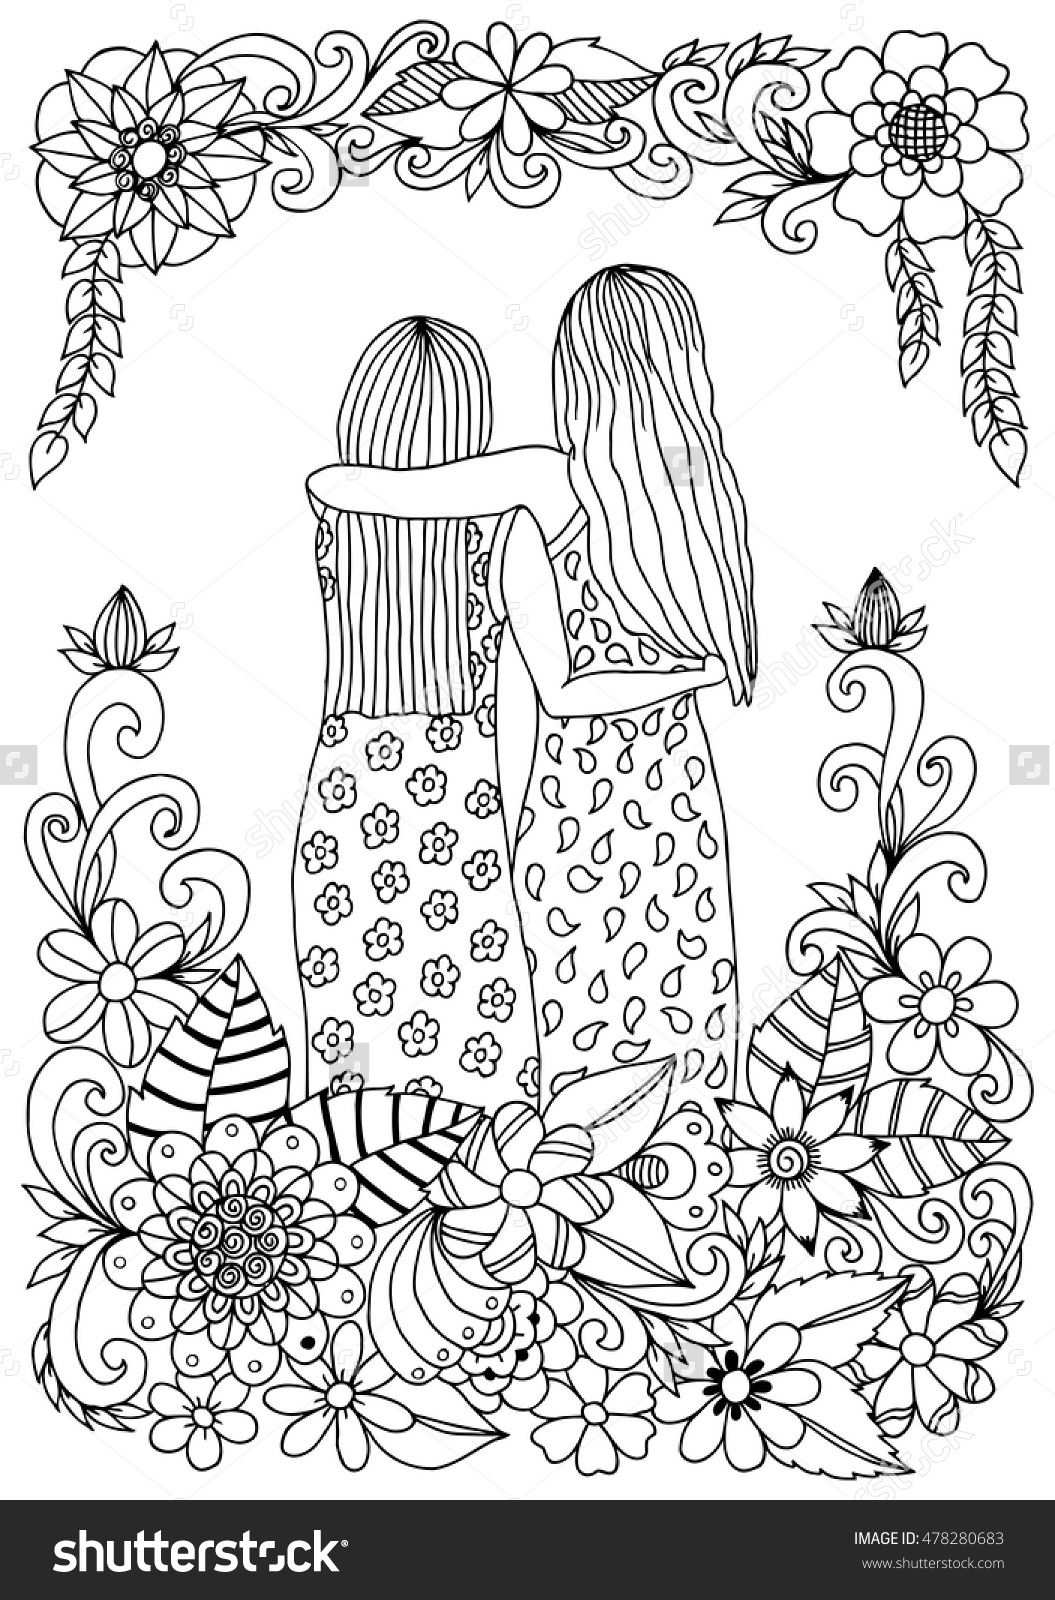 Zentangle Two Sisters Amongst Flowers Hugging Coloring Page